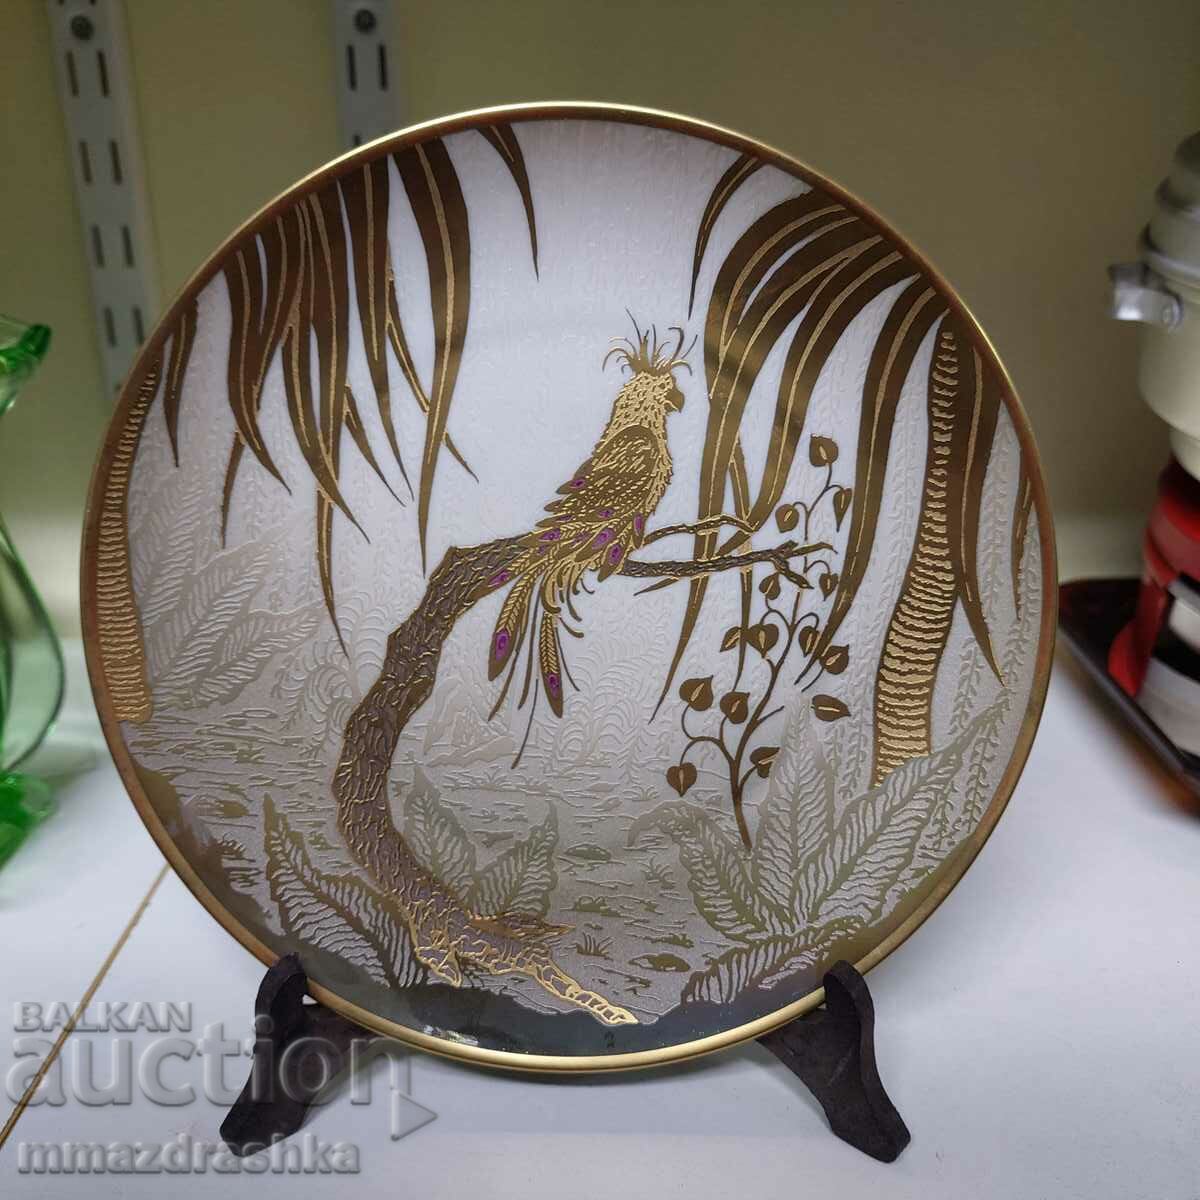 Plate painted with 24 carat gold